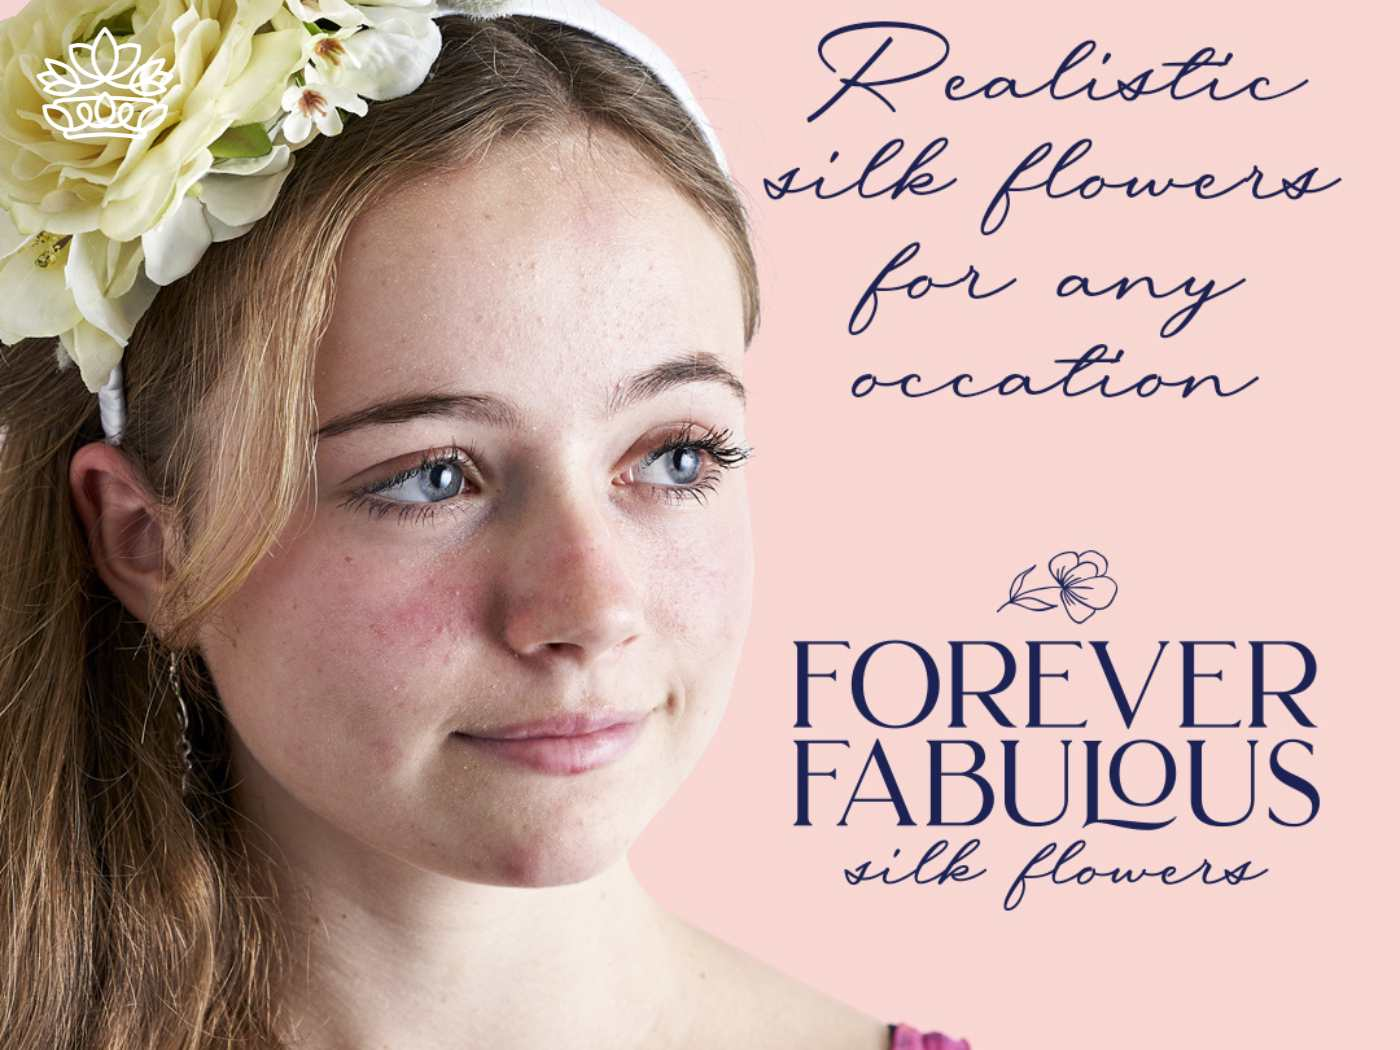 A young lady adorned with a delicate silk flower headband gazes gently to the side, embodying grace and natural beauty, beside the text 'Realistic silk flowers for any occasion' and 'FOREVER FABULOUS silk flowers', available at Fabulous Flowers and Gifts.